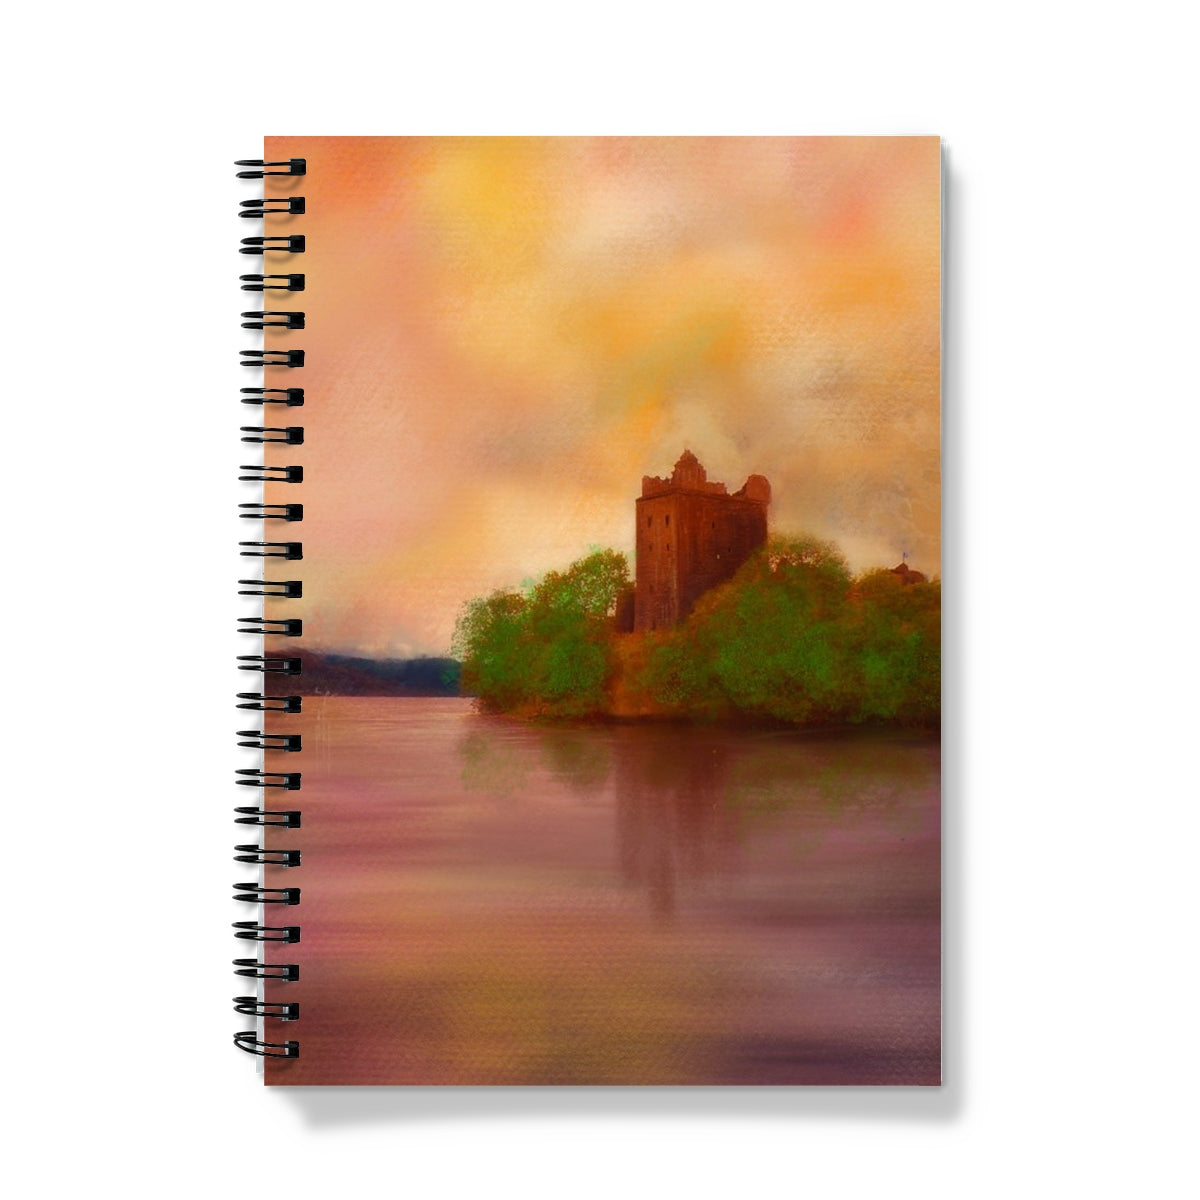 Urquhart Castle Art Gifts Notebook-Journals & Notebooks-Historic & Iconic Scotland Art Gallery-A5-Lined-Paintings, Prints, Homeware, Art Gifts From Scotland By Scottish Artist Kevin Hunter